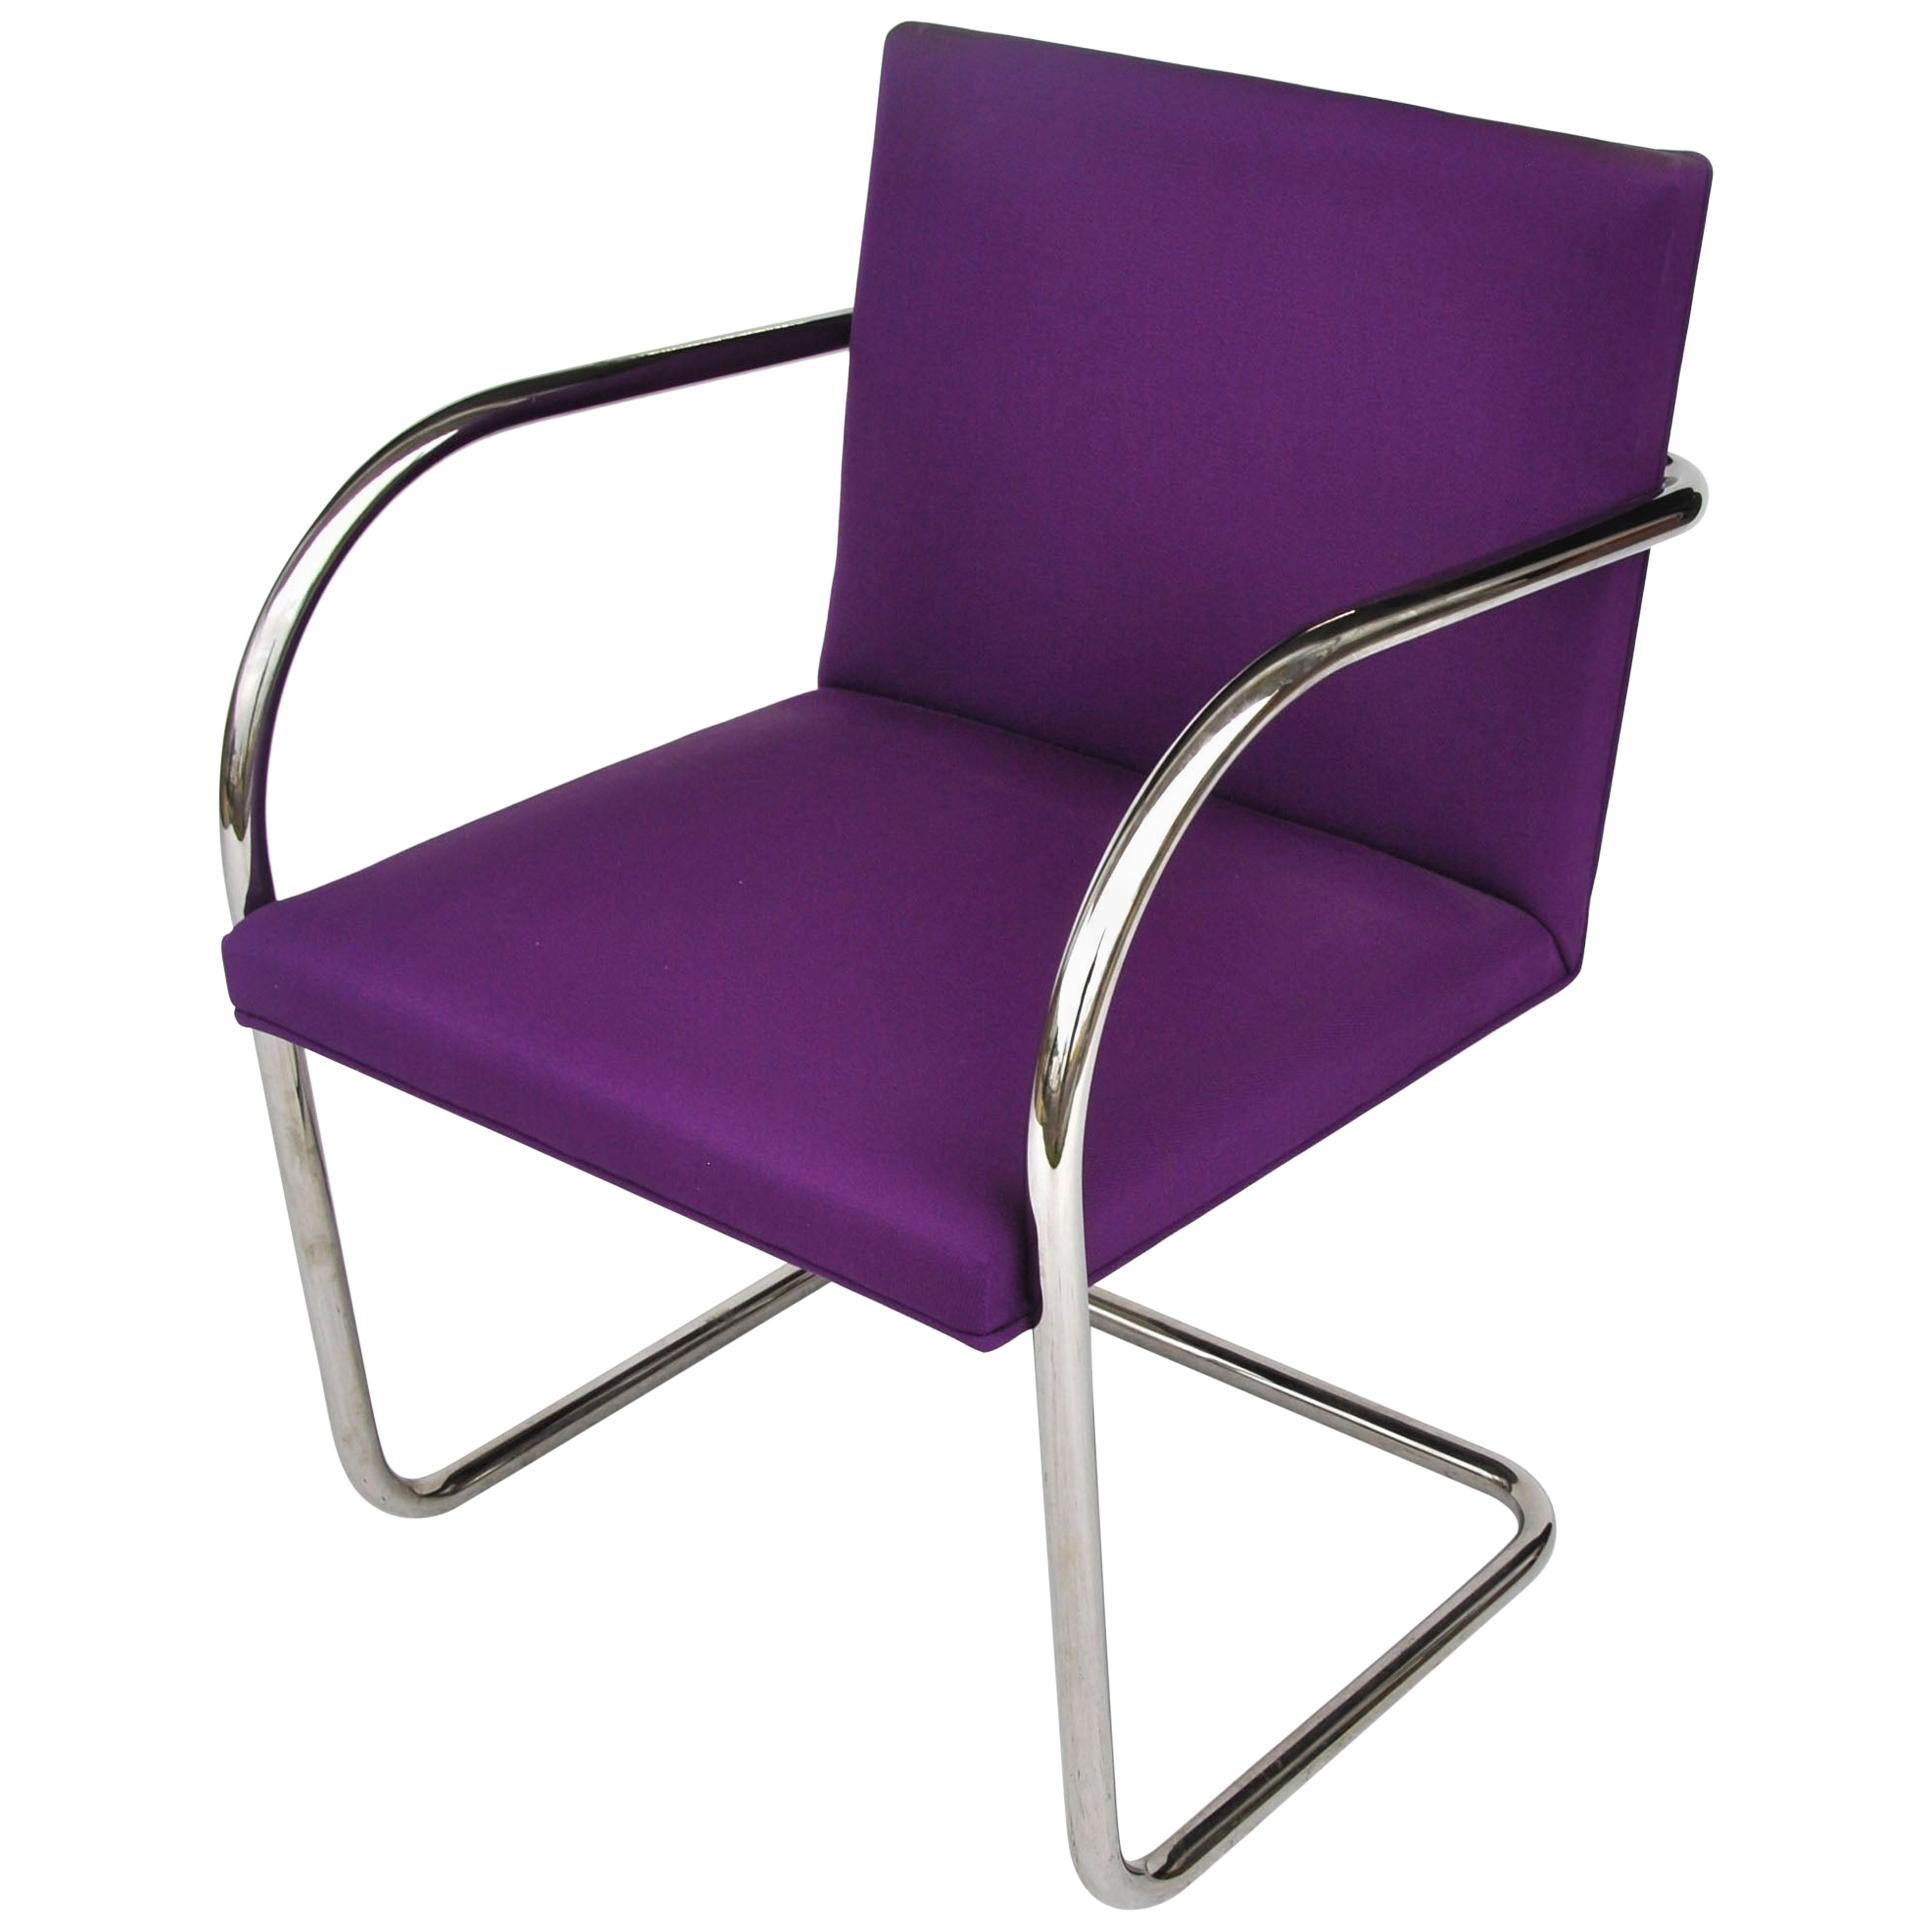 1 Midcentury Knoll Brno Stainless Tubular Chair by Ludwig Mies van der Rohe